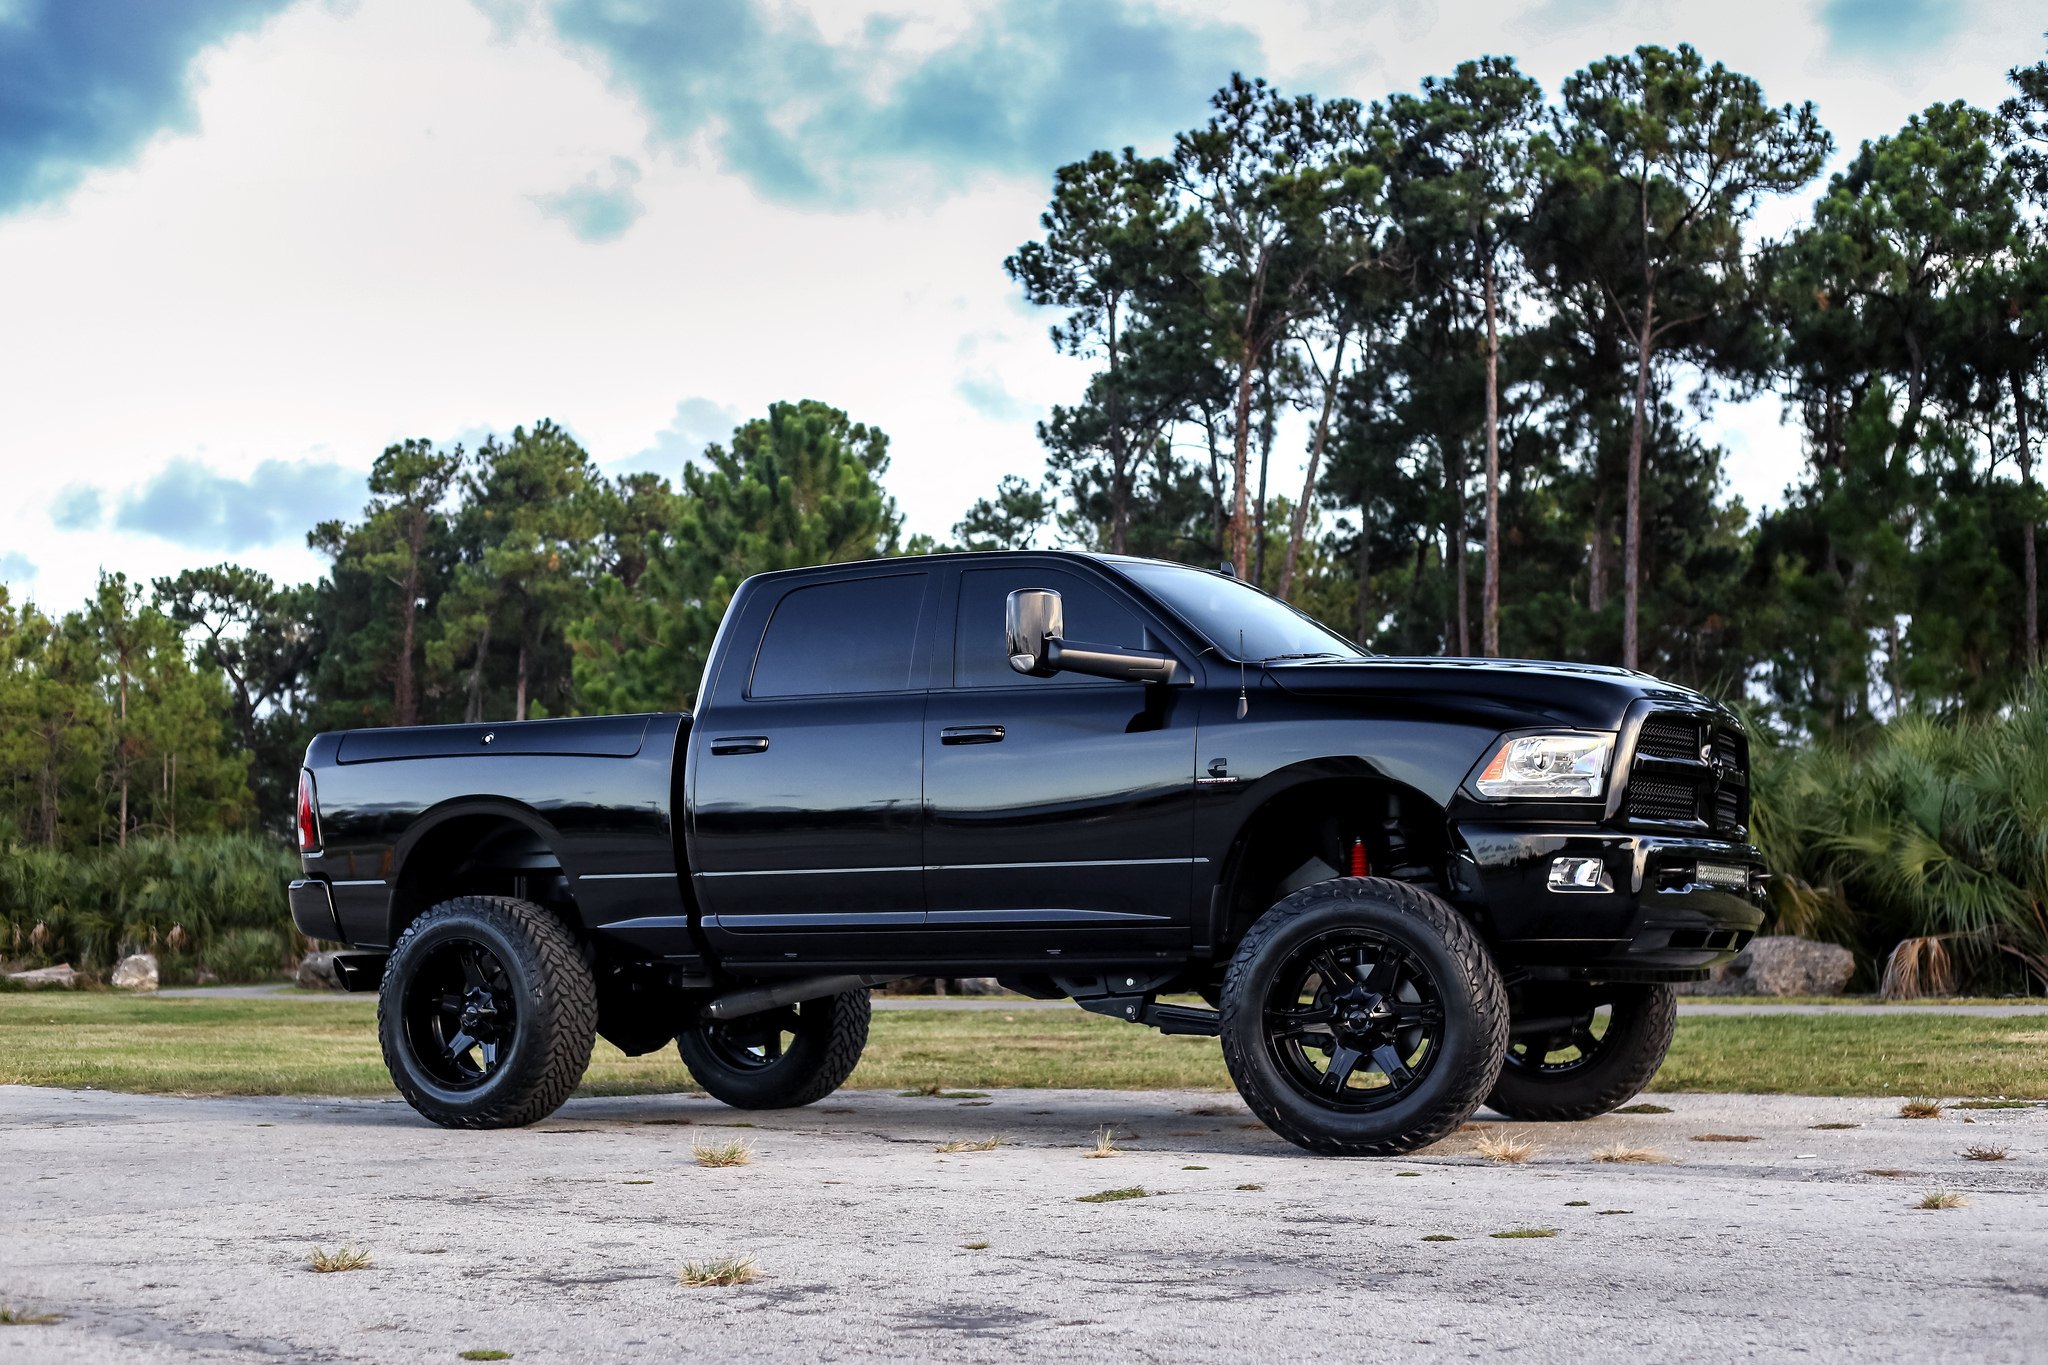 Lifted Dodge Ram With Custom Touches and Colormatched Fuel Wheels.